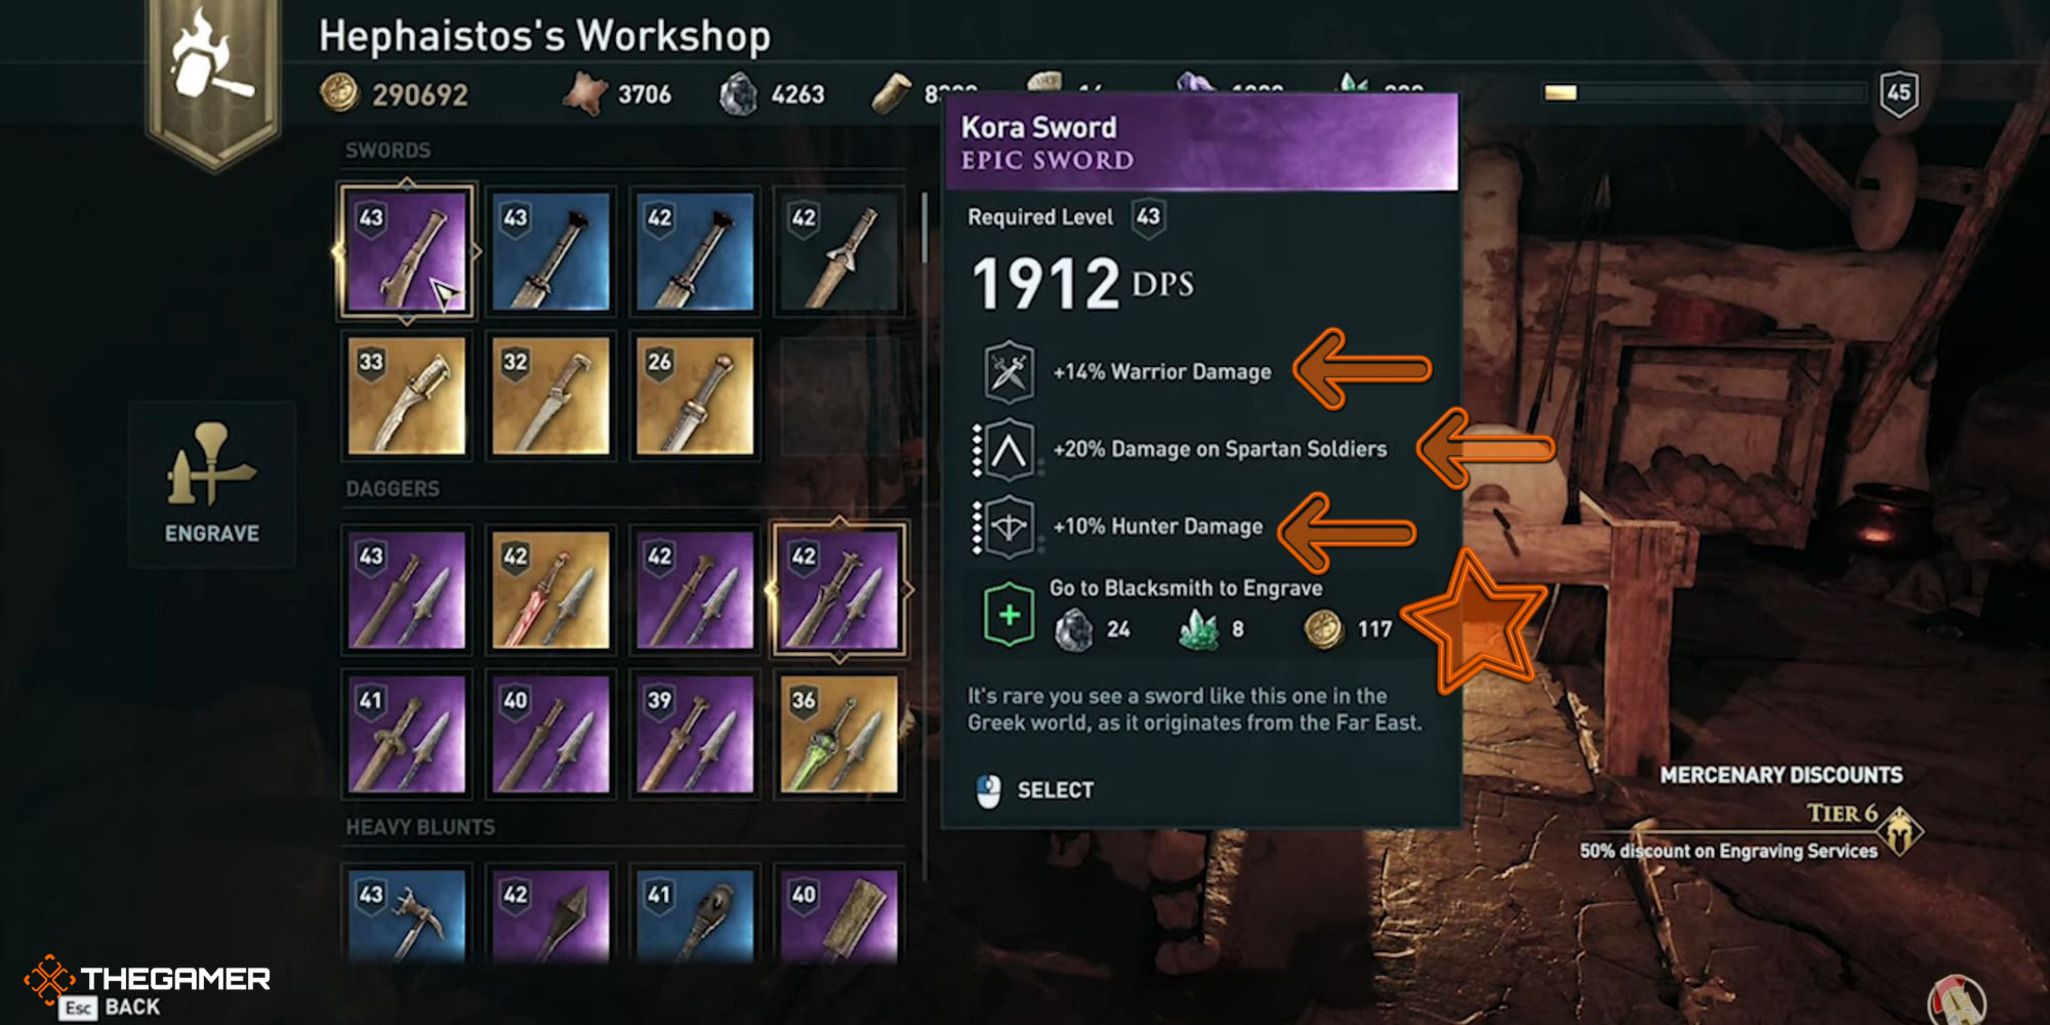 Epic Weapon Kora Sword and Engraving Options